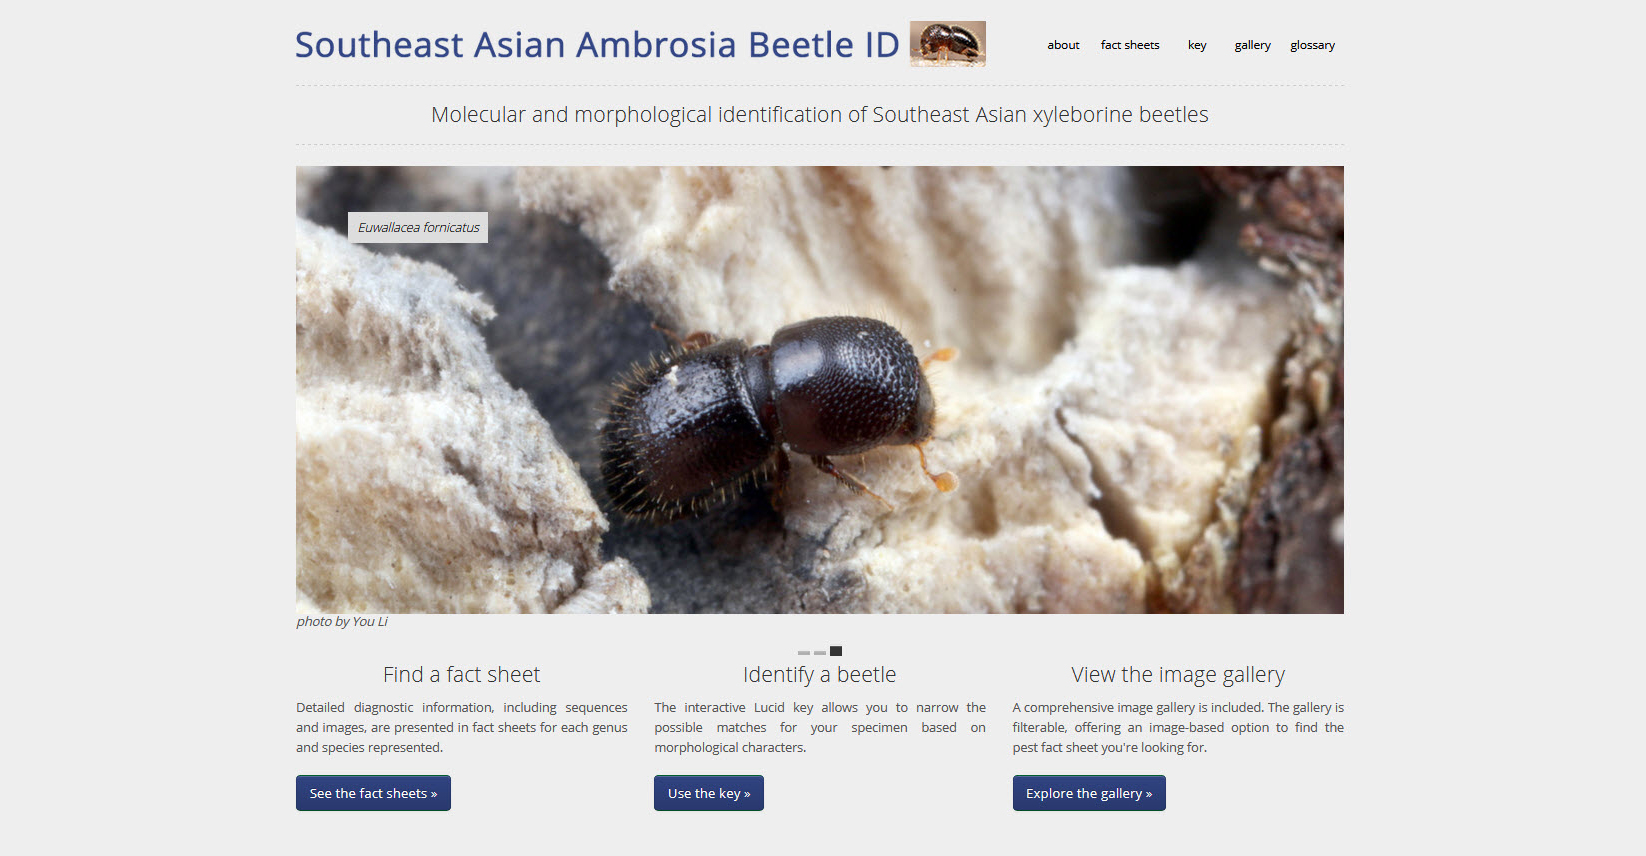 Announcing a new tool for identification of ambrosia beetles